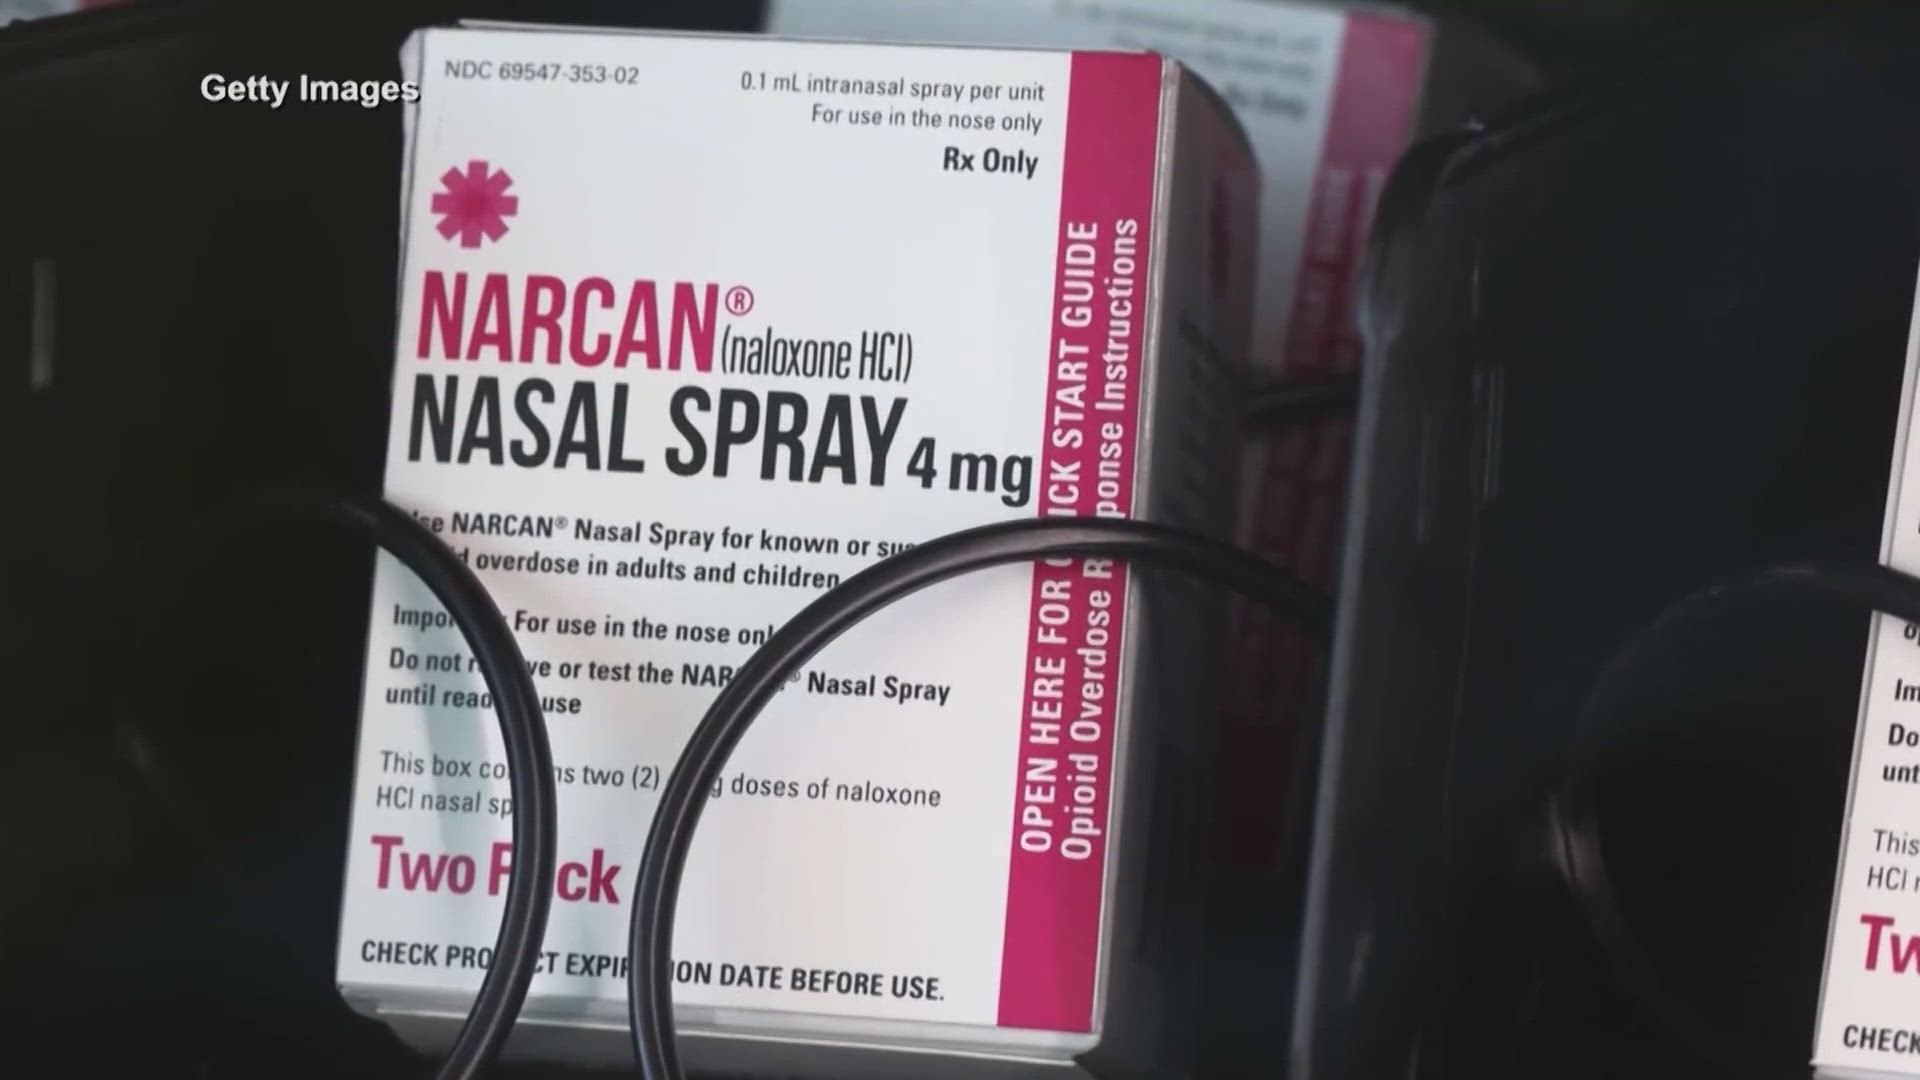 Narcan's availability at retail stores follows approval for over-the-counter use by the U.S. Food and Drug Administration.